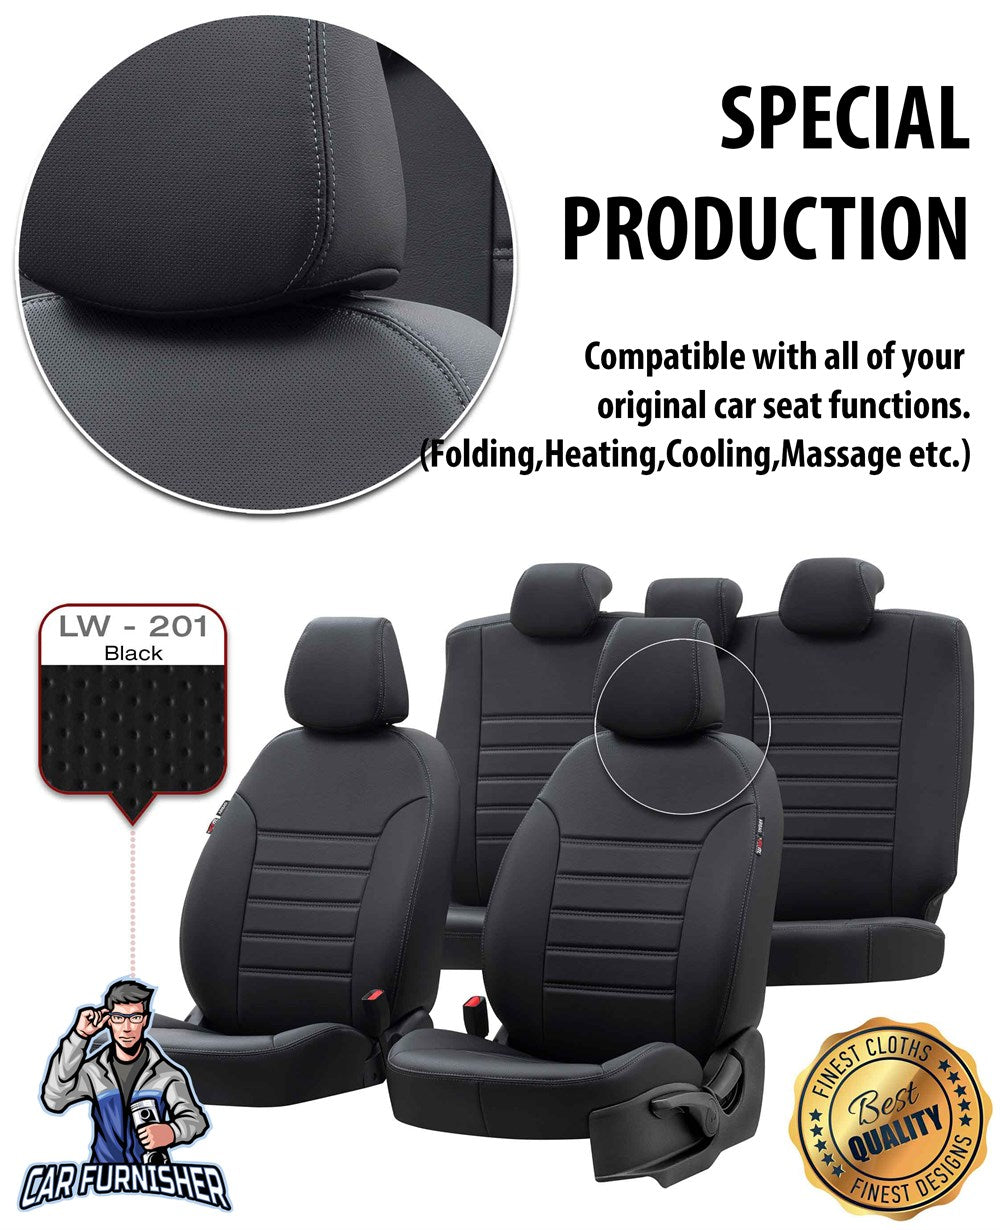 Audi A4 Seat Cover Istanbul Leather Design Black Leather